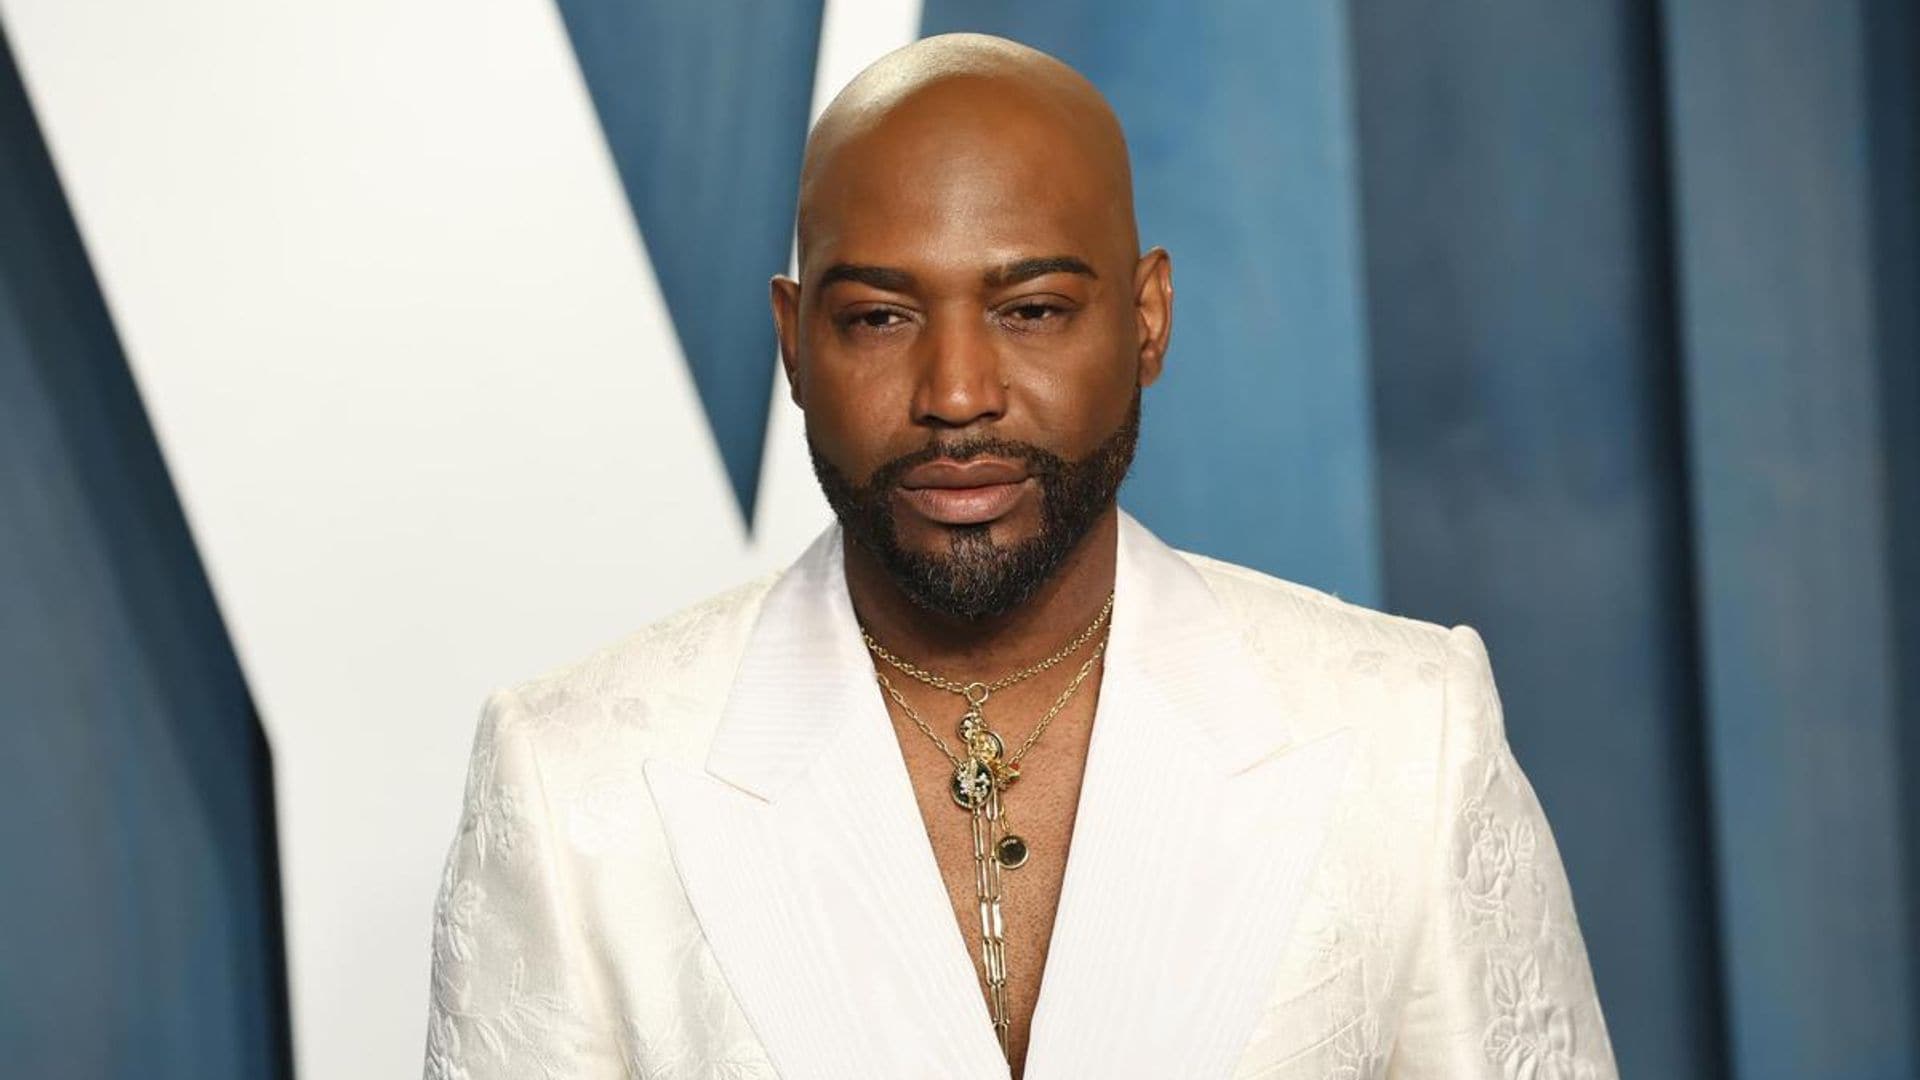 Karamo Brown recounts the scary moment he found his eldest son dying from an overdose